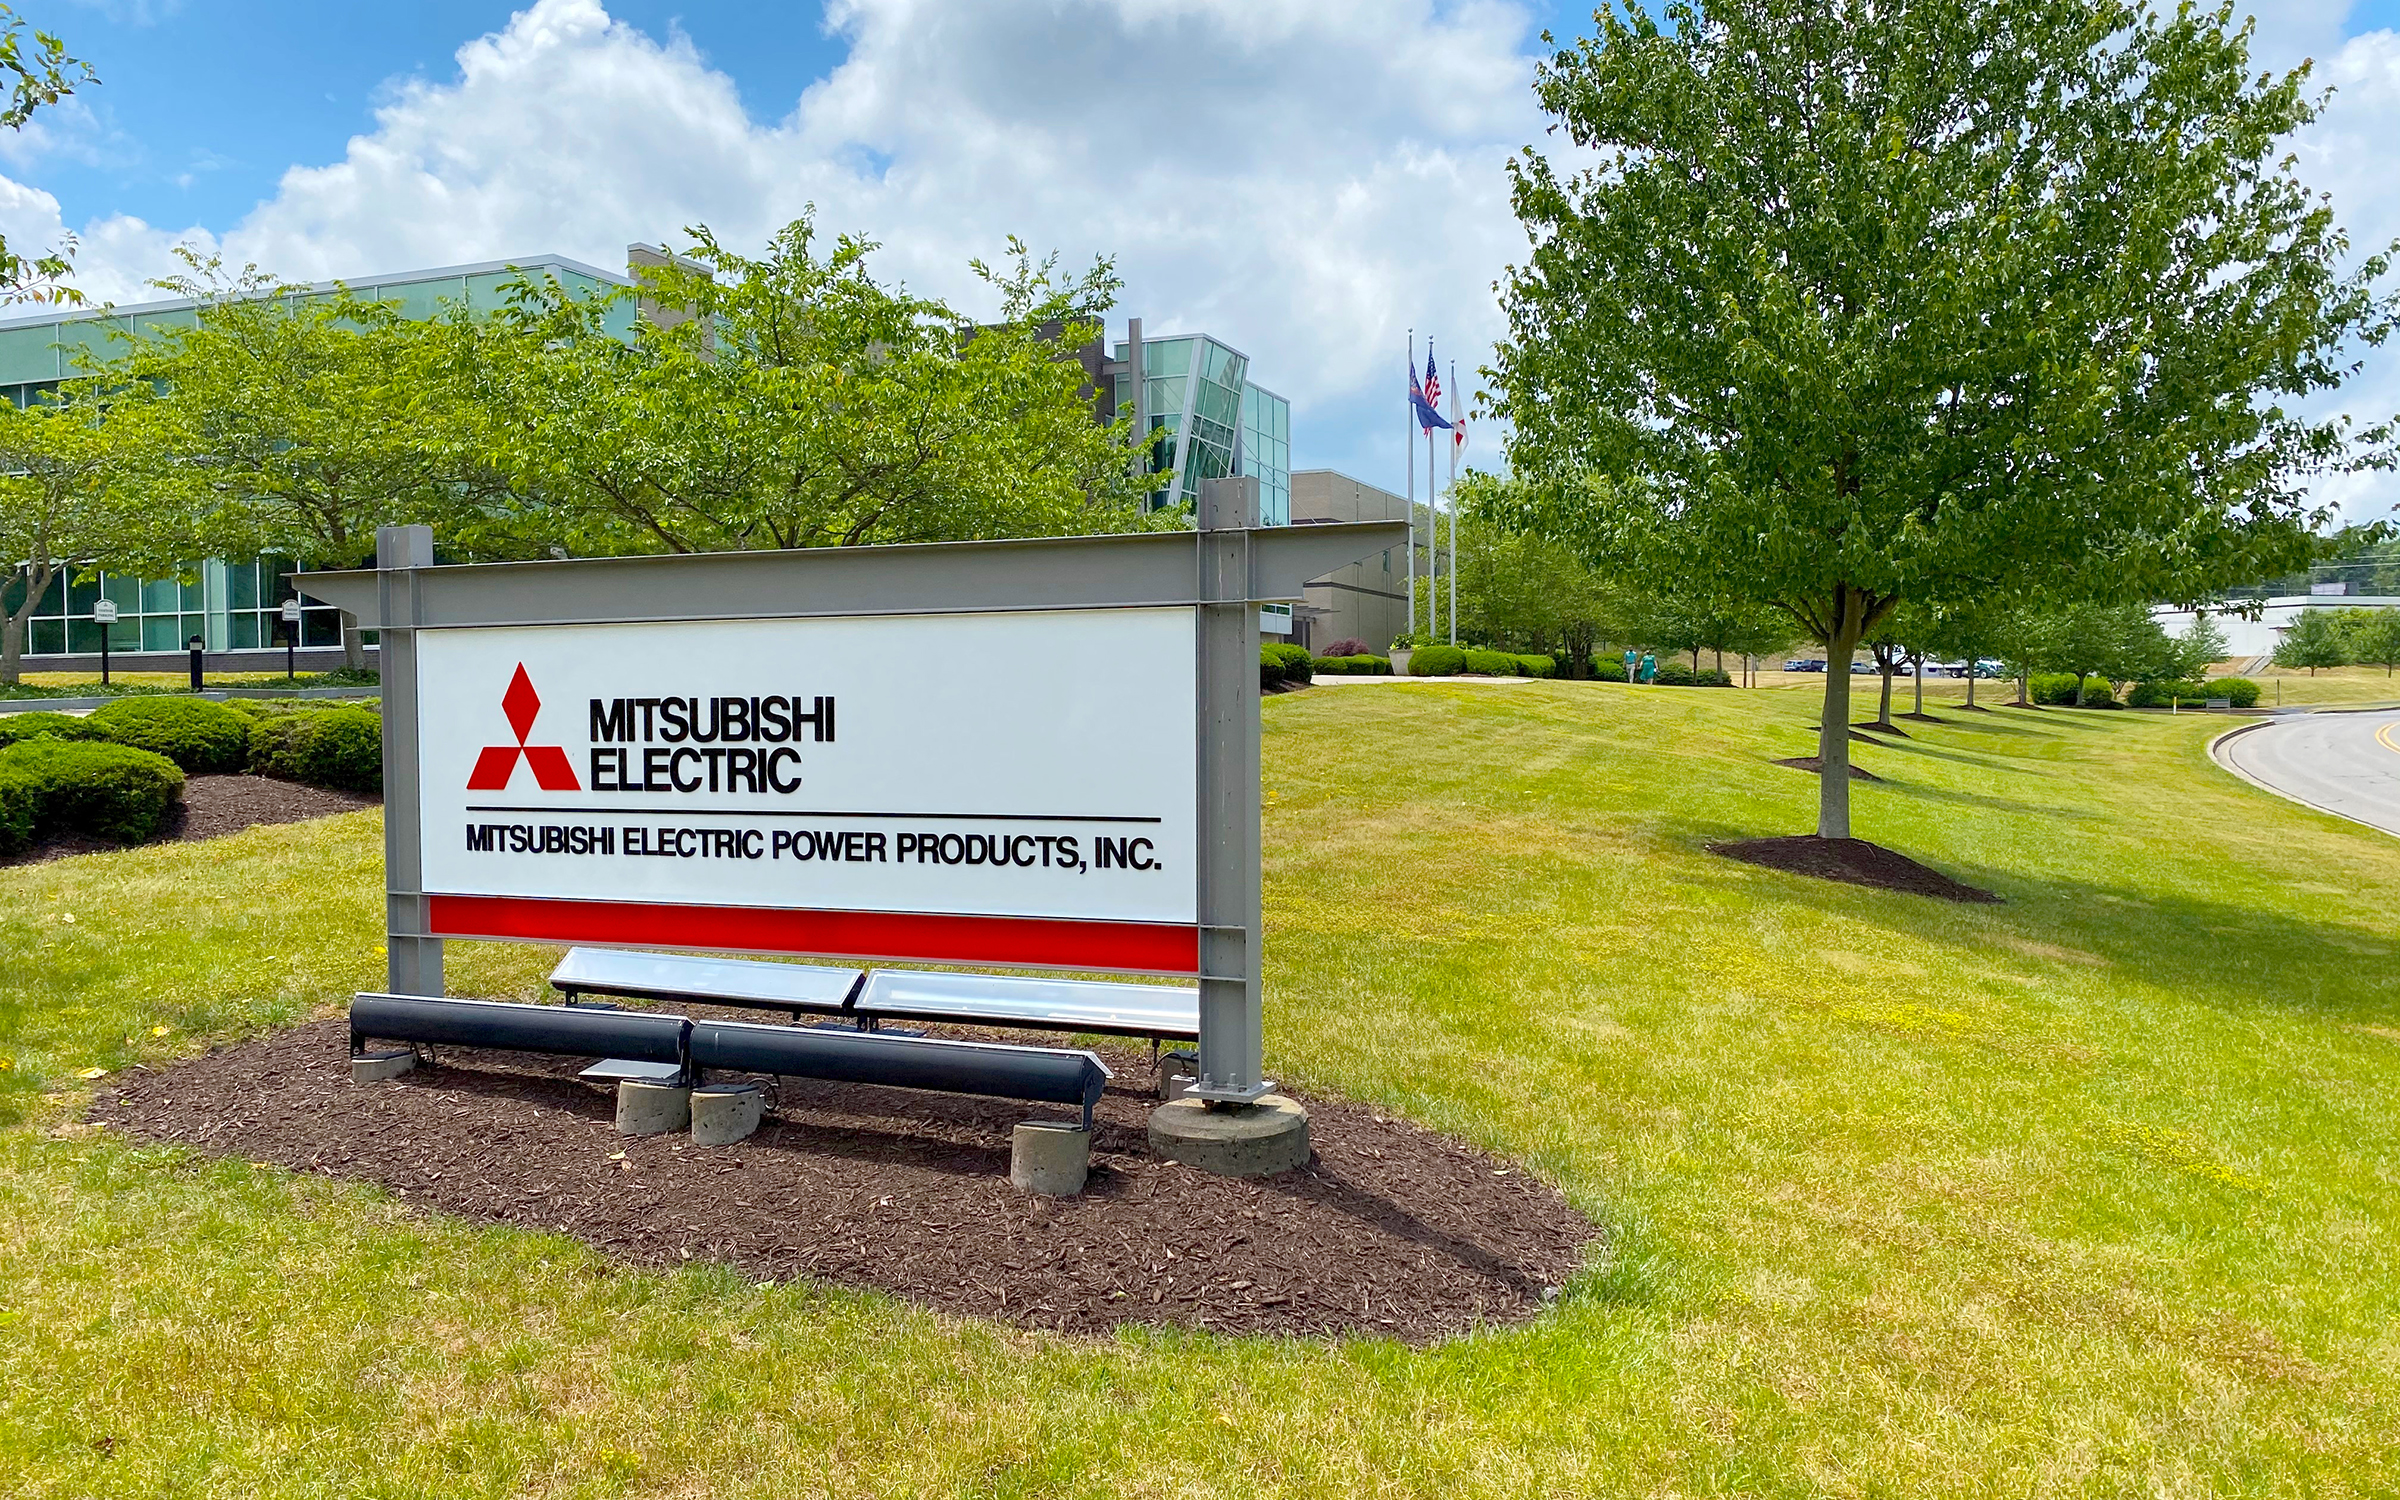 MEPPI addresses the diverse and evolving requirements of the electric power industry from its headquarters in Warrendale, Pa., just outside of Pittsburgh.